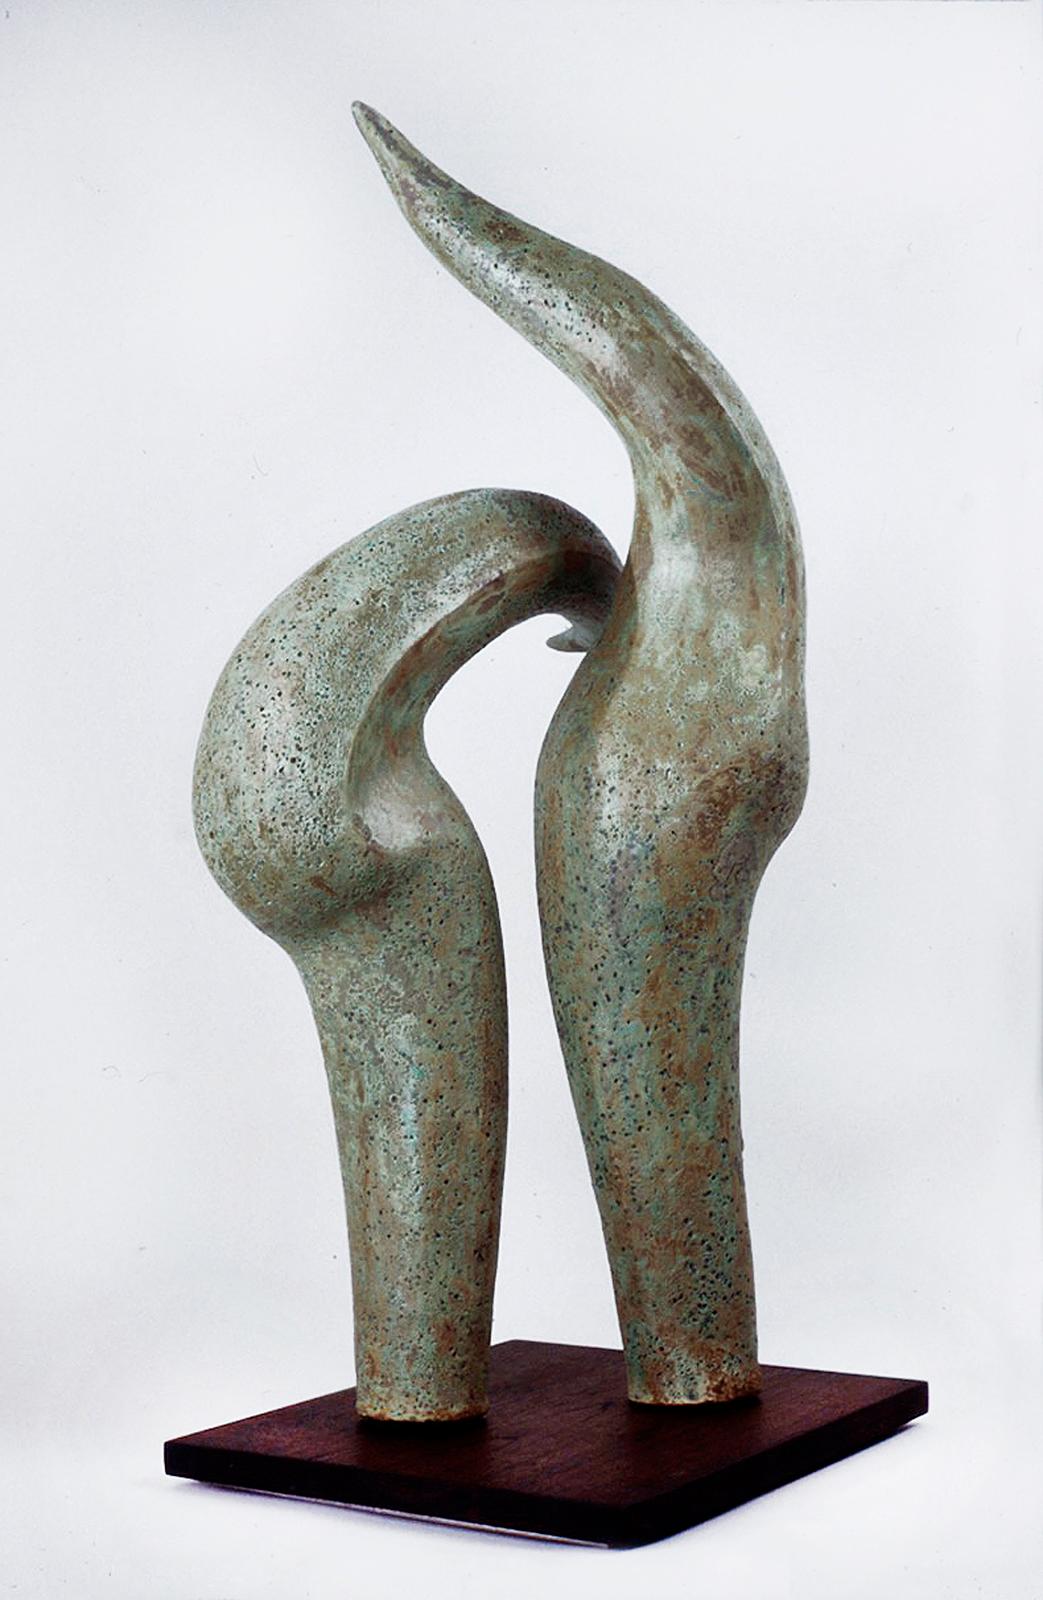 Elaine Lorenz Abstract Sculpture - “Tête-a-Tête”, blue-green and brown ceramic sculpture of intimacy